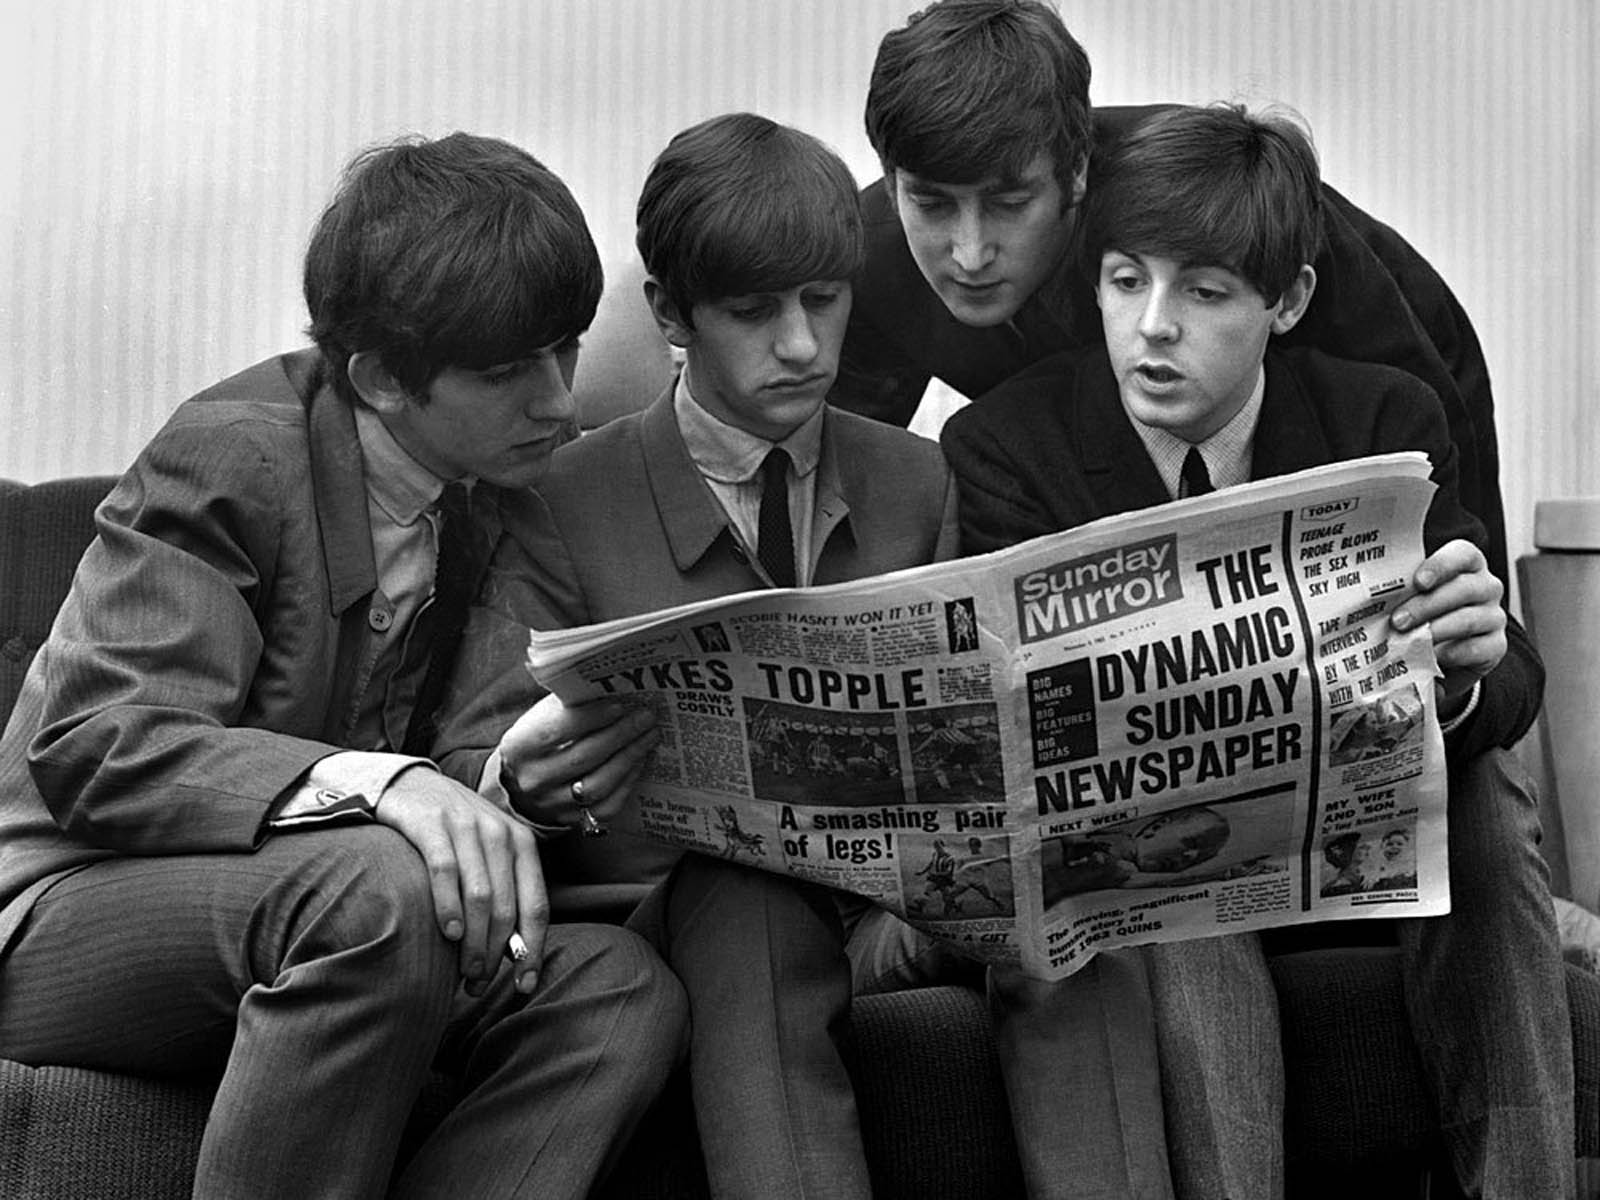 The Beatles HD Wallpaper Pictures